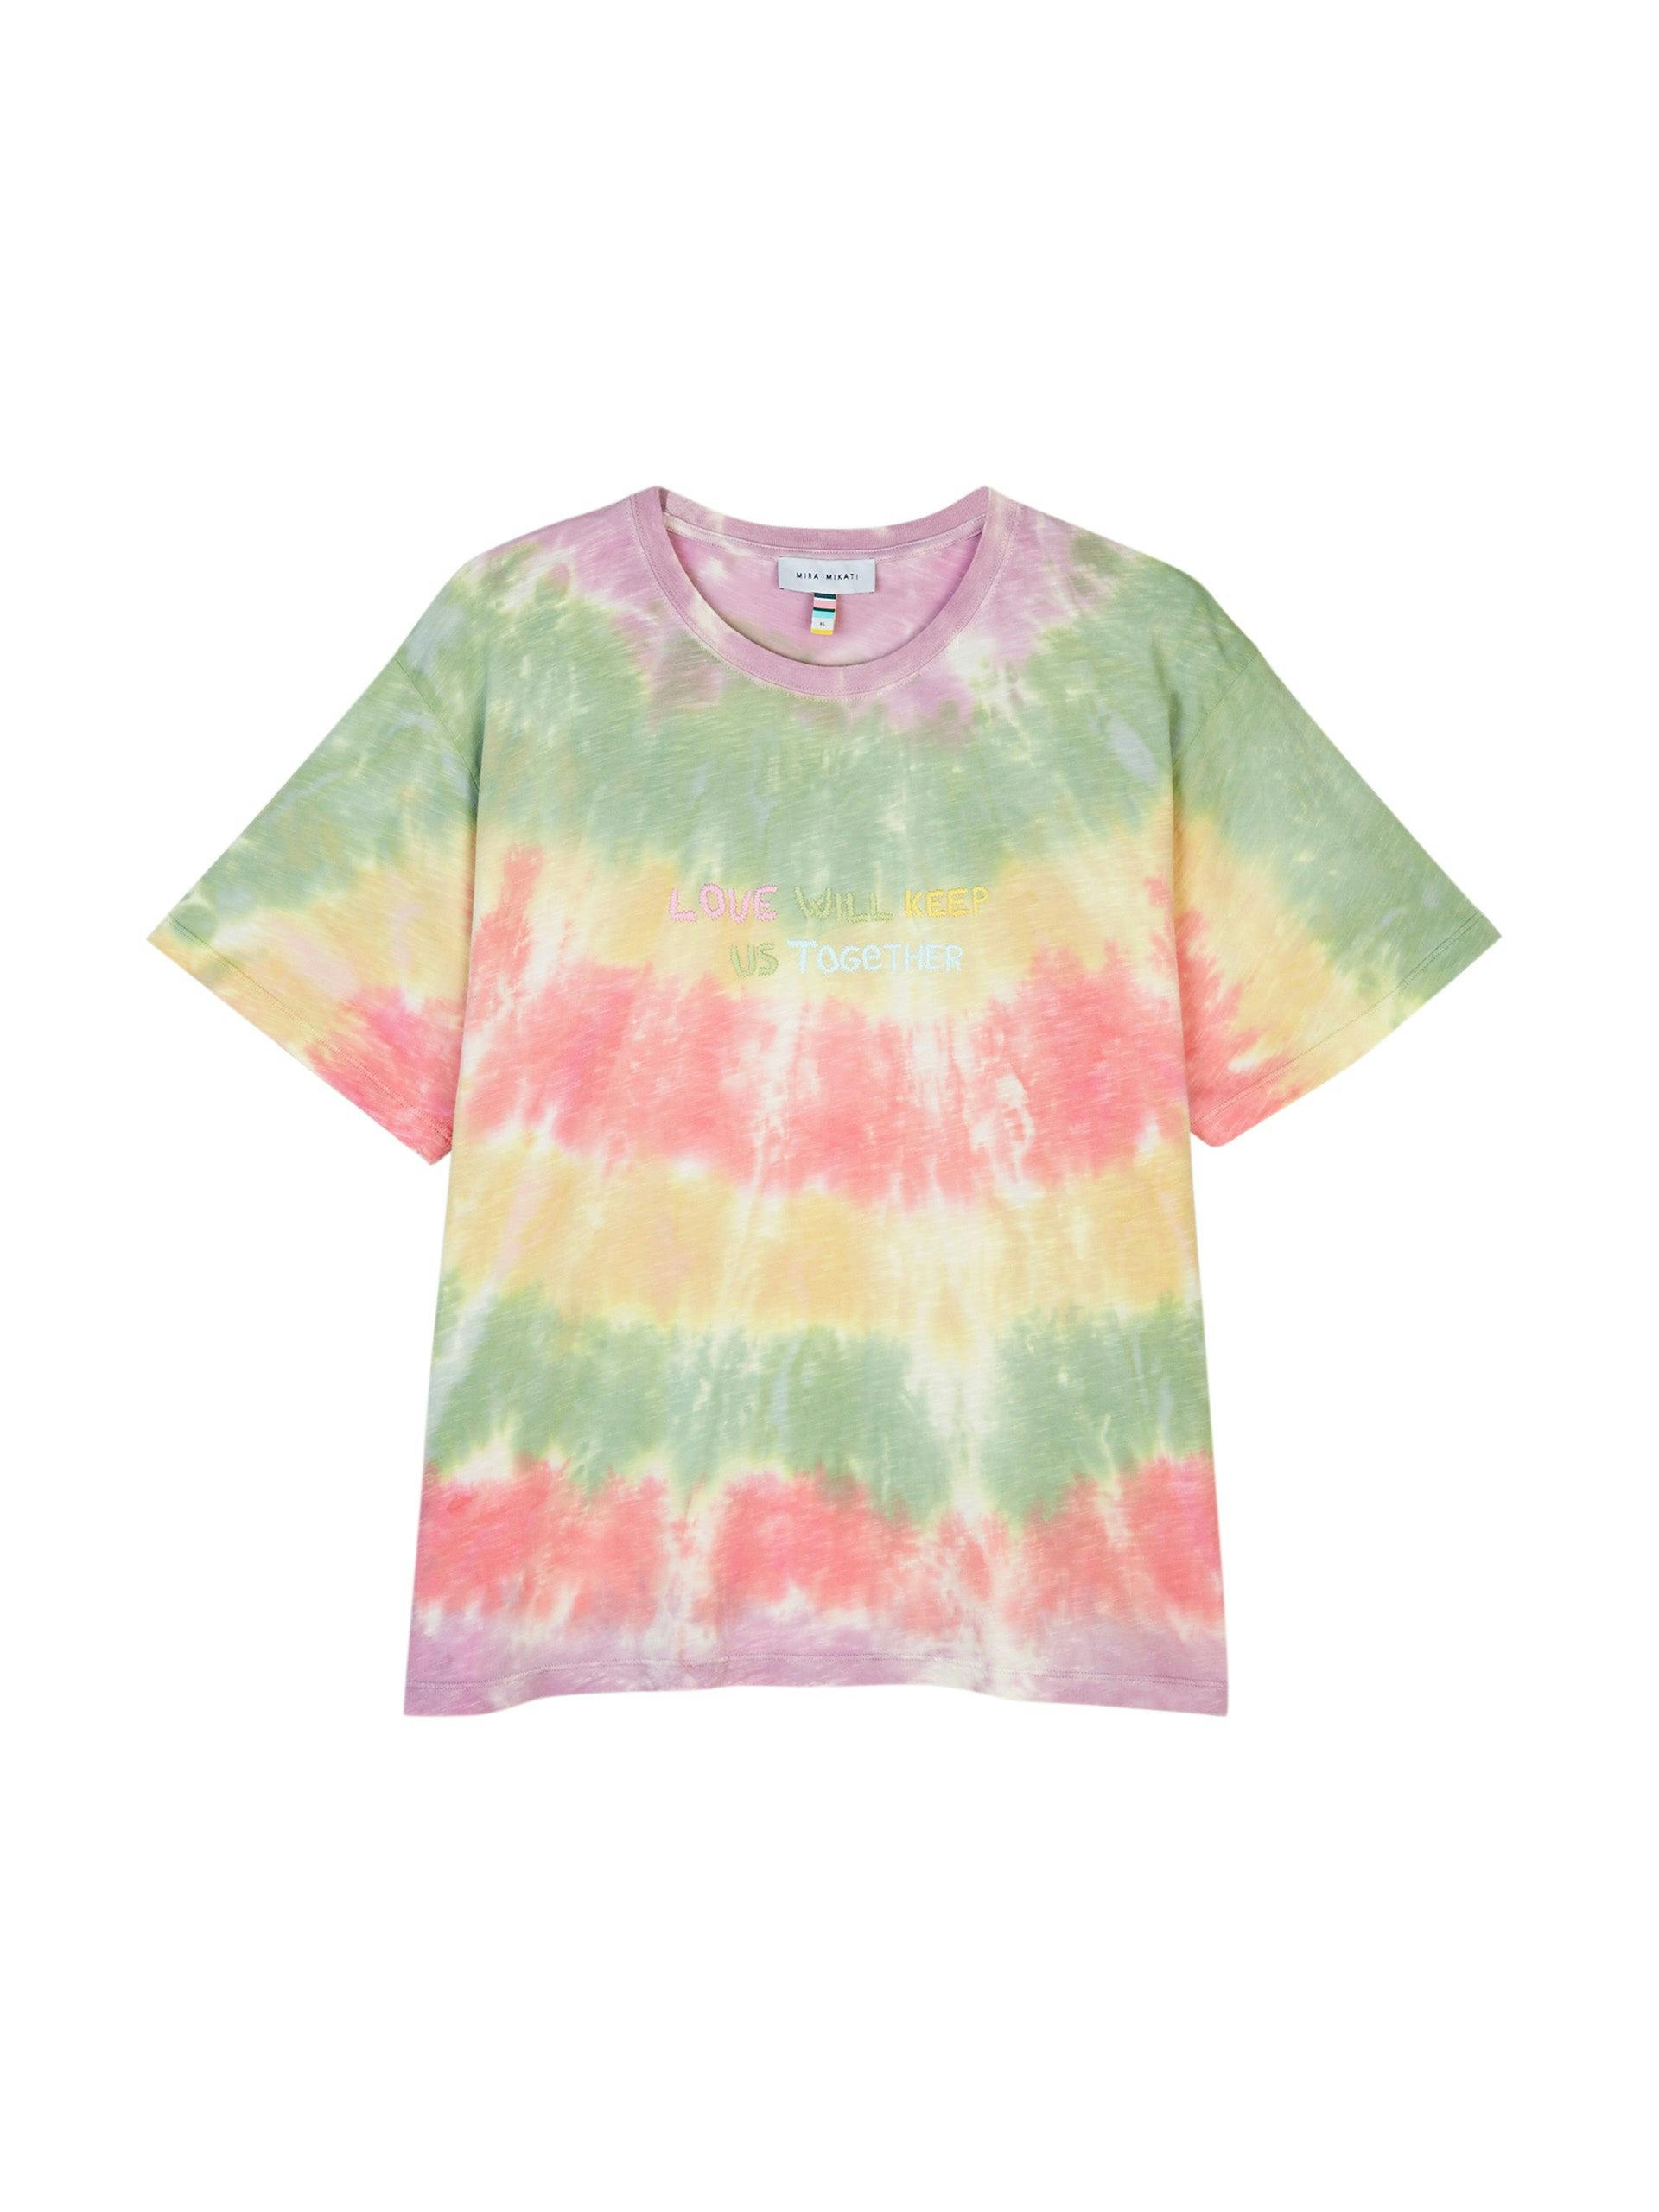 Embroidered tie-dye t-shirt